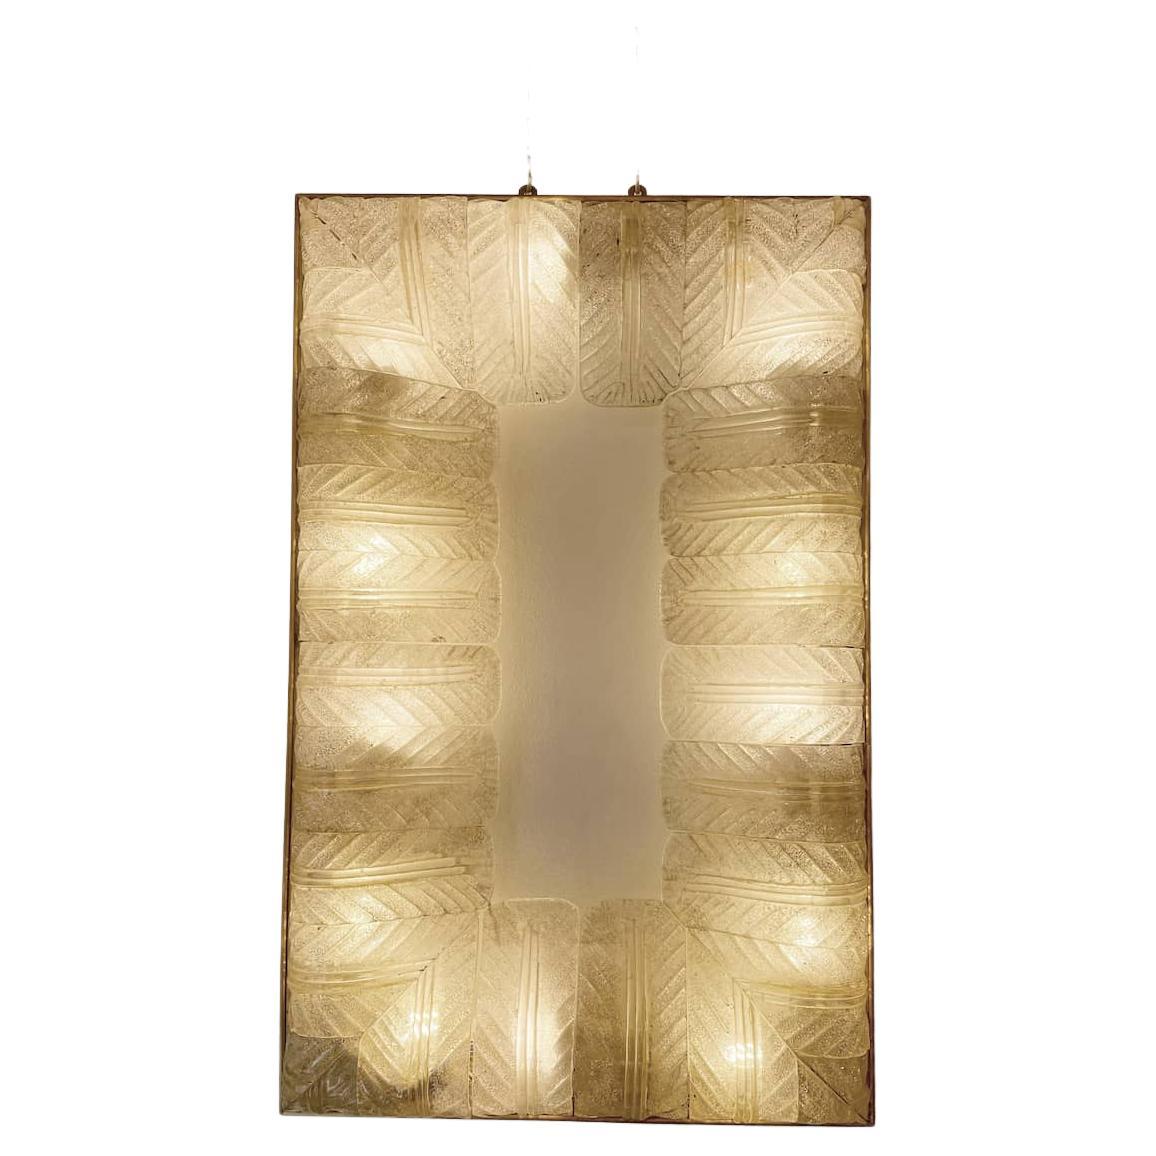 White glass wall sconce with golden spangles and brass border by Barovier & Toso, 1940s. The glass of the wall lamp has been worked in such a way as to create leaves that start from the outside on the outside and shrink towards the